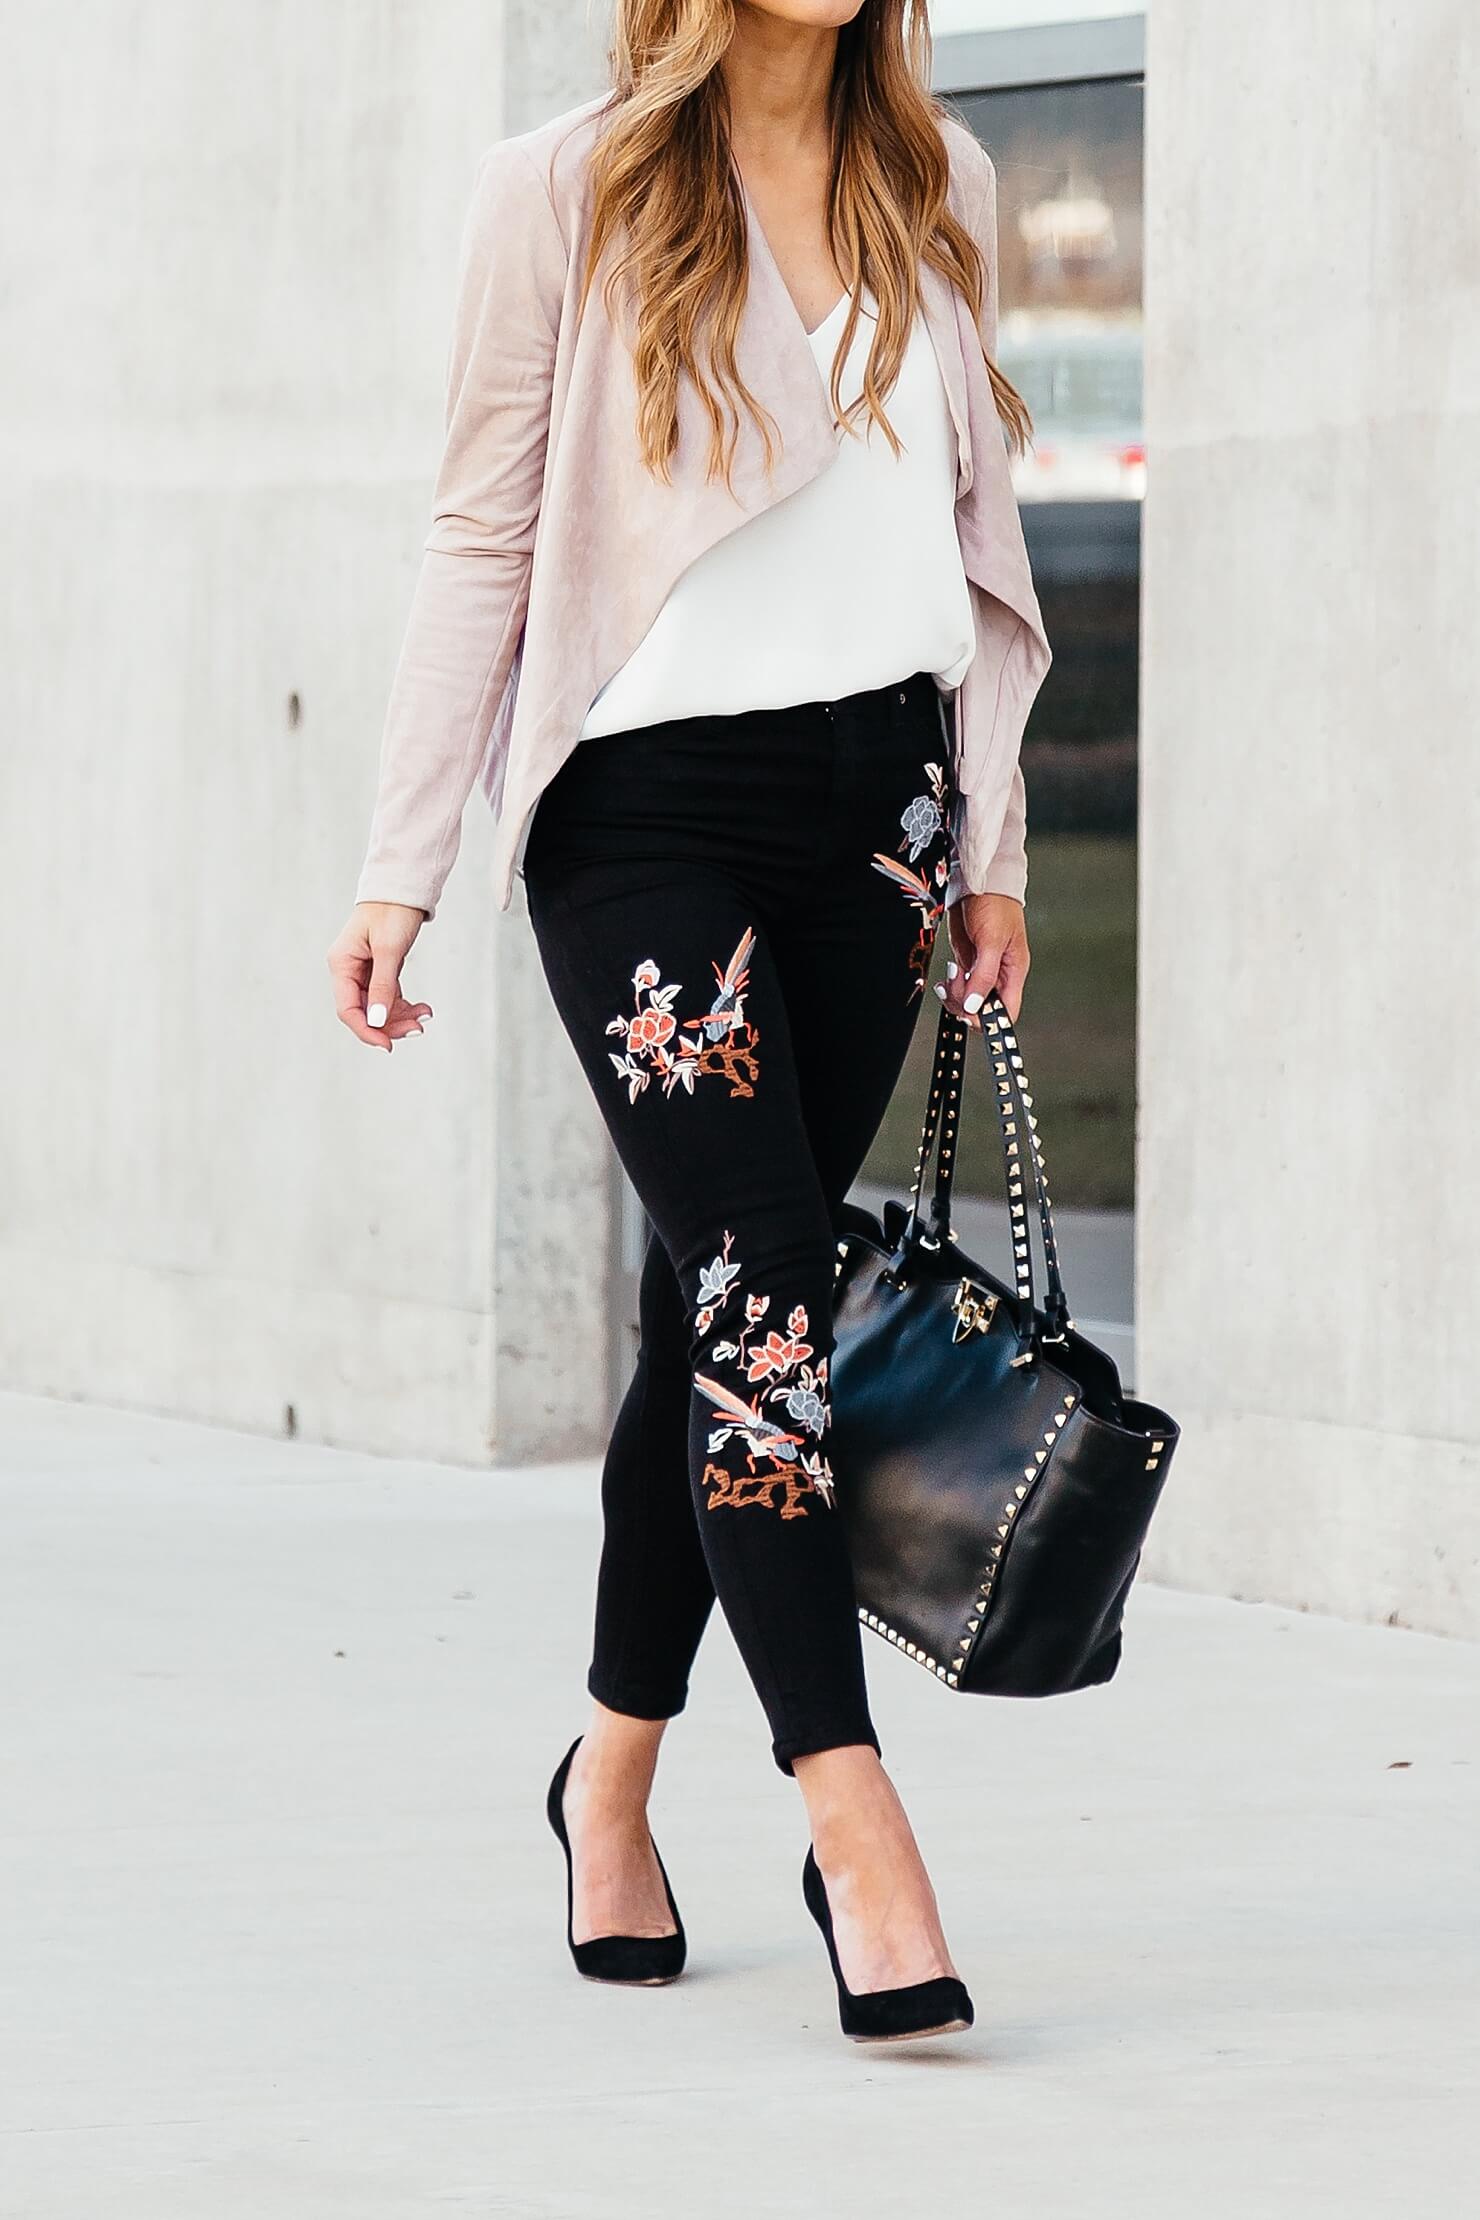 embroidered jeans outfit // floral pant outfit // pink jacket outfit ideas 